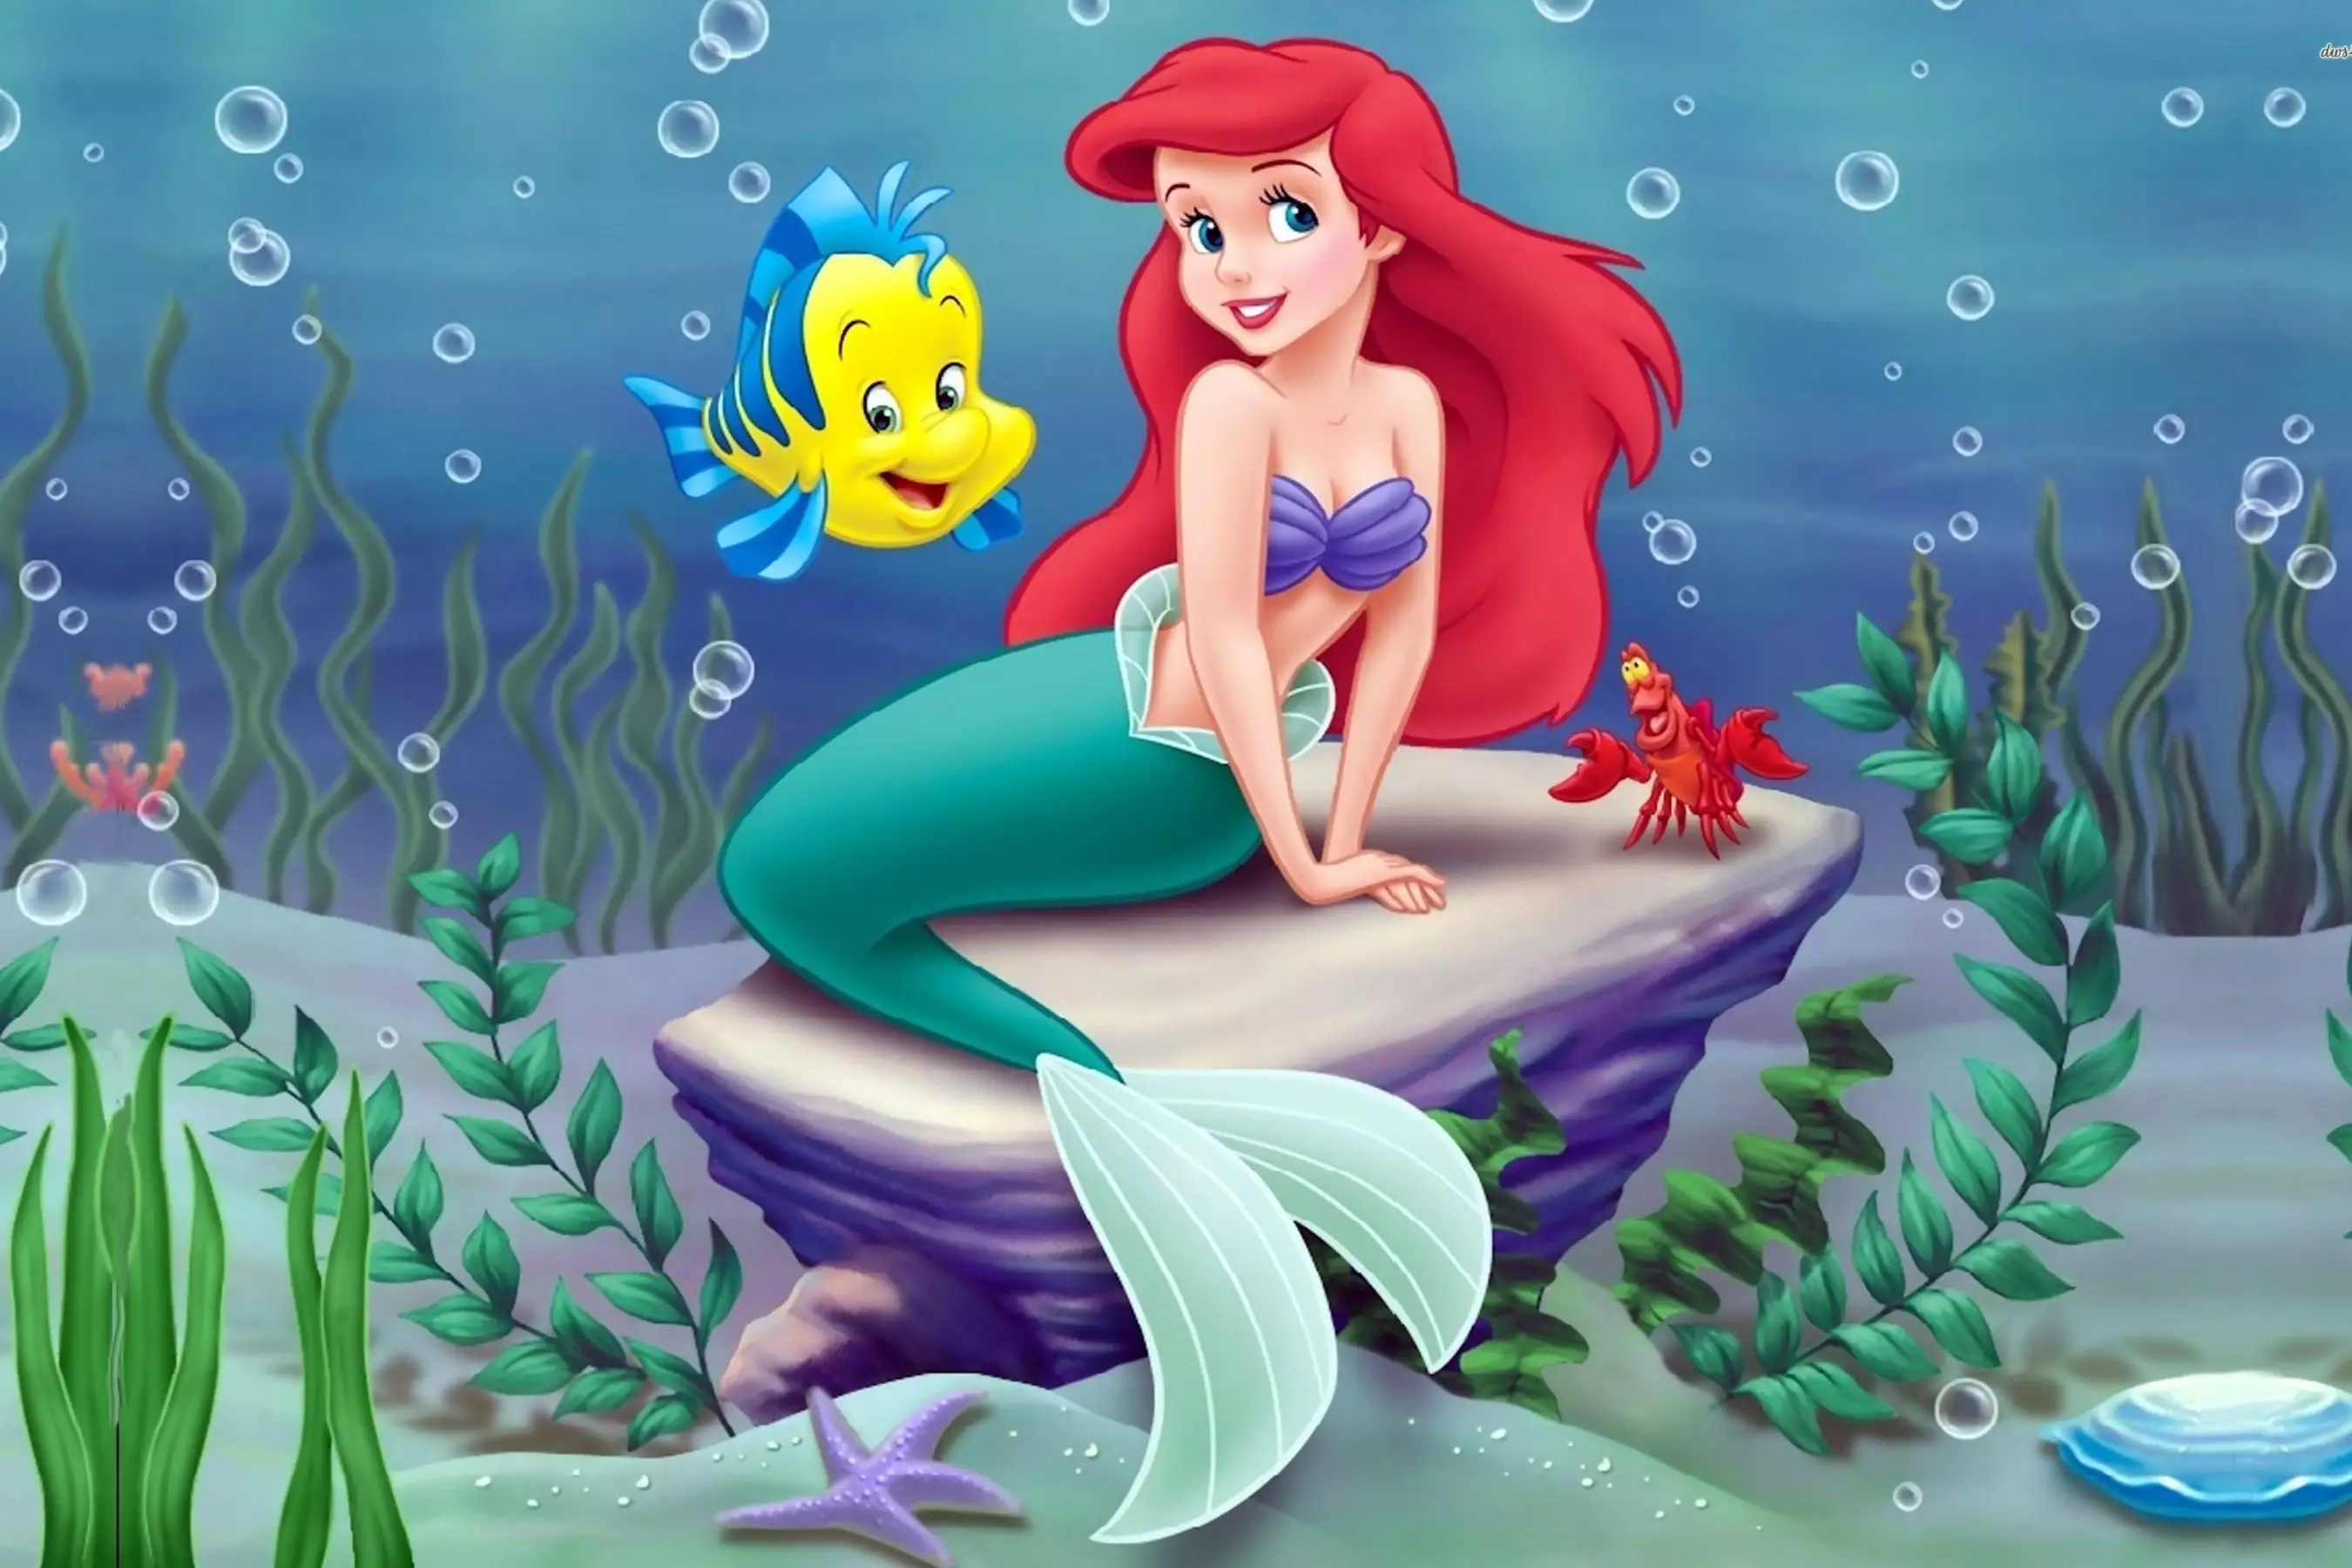 The Little Mermaid was released in 1989 (